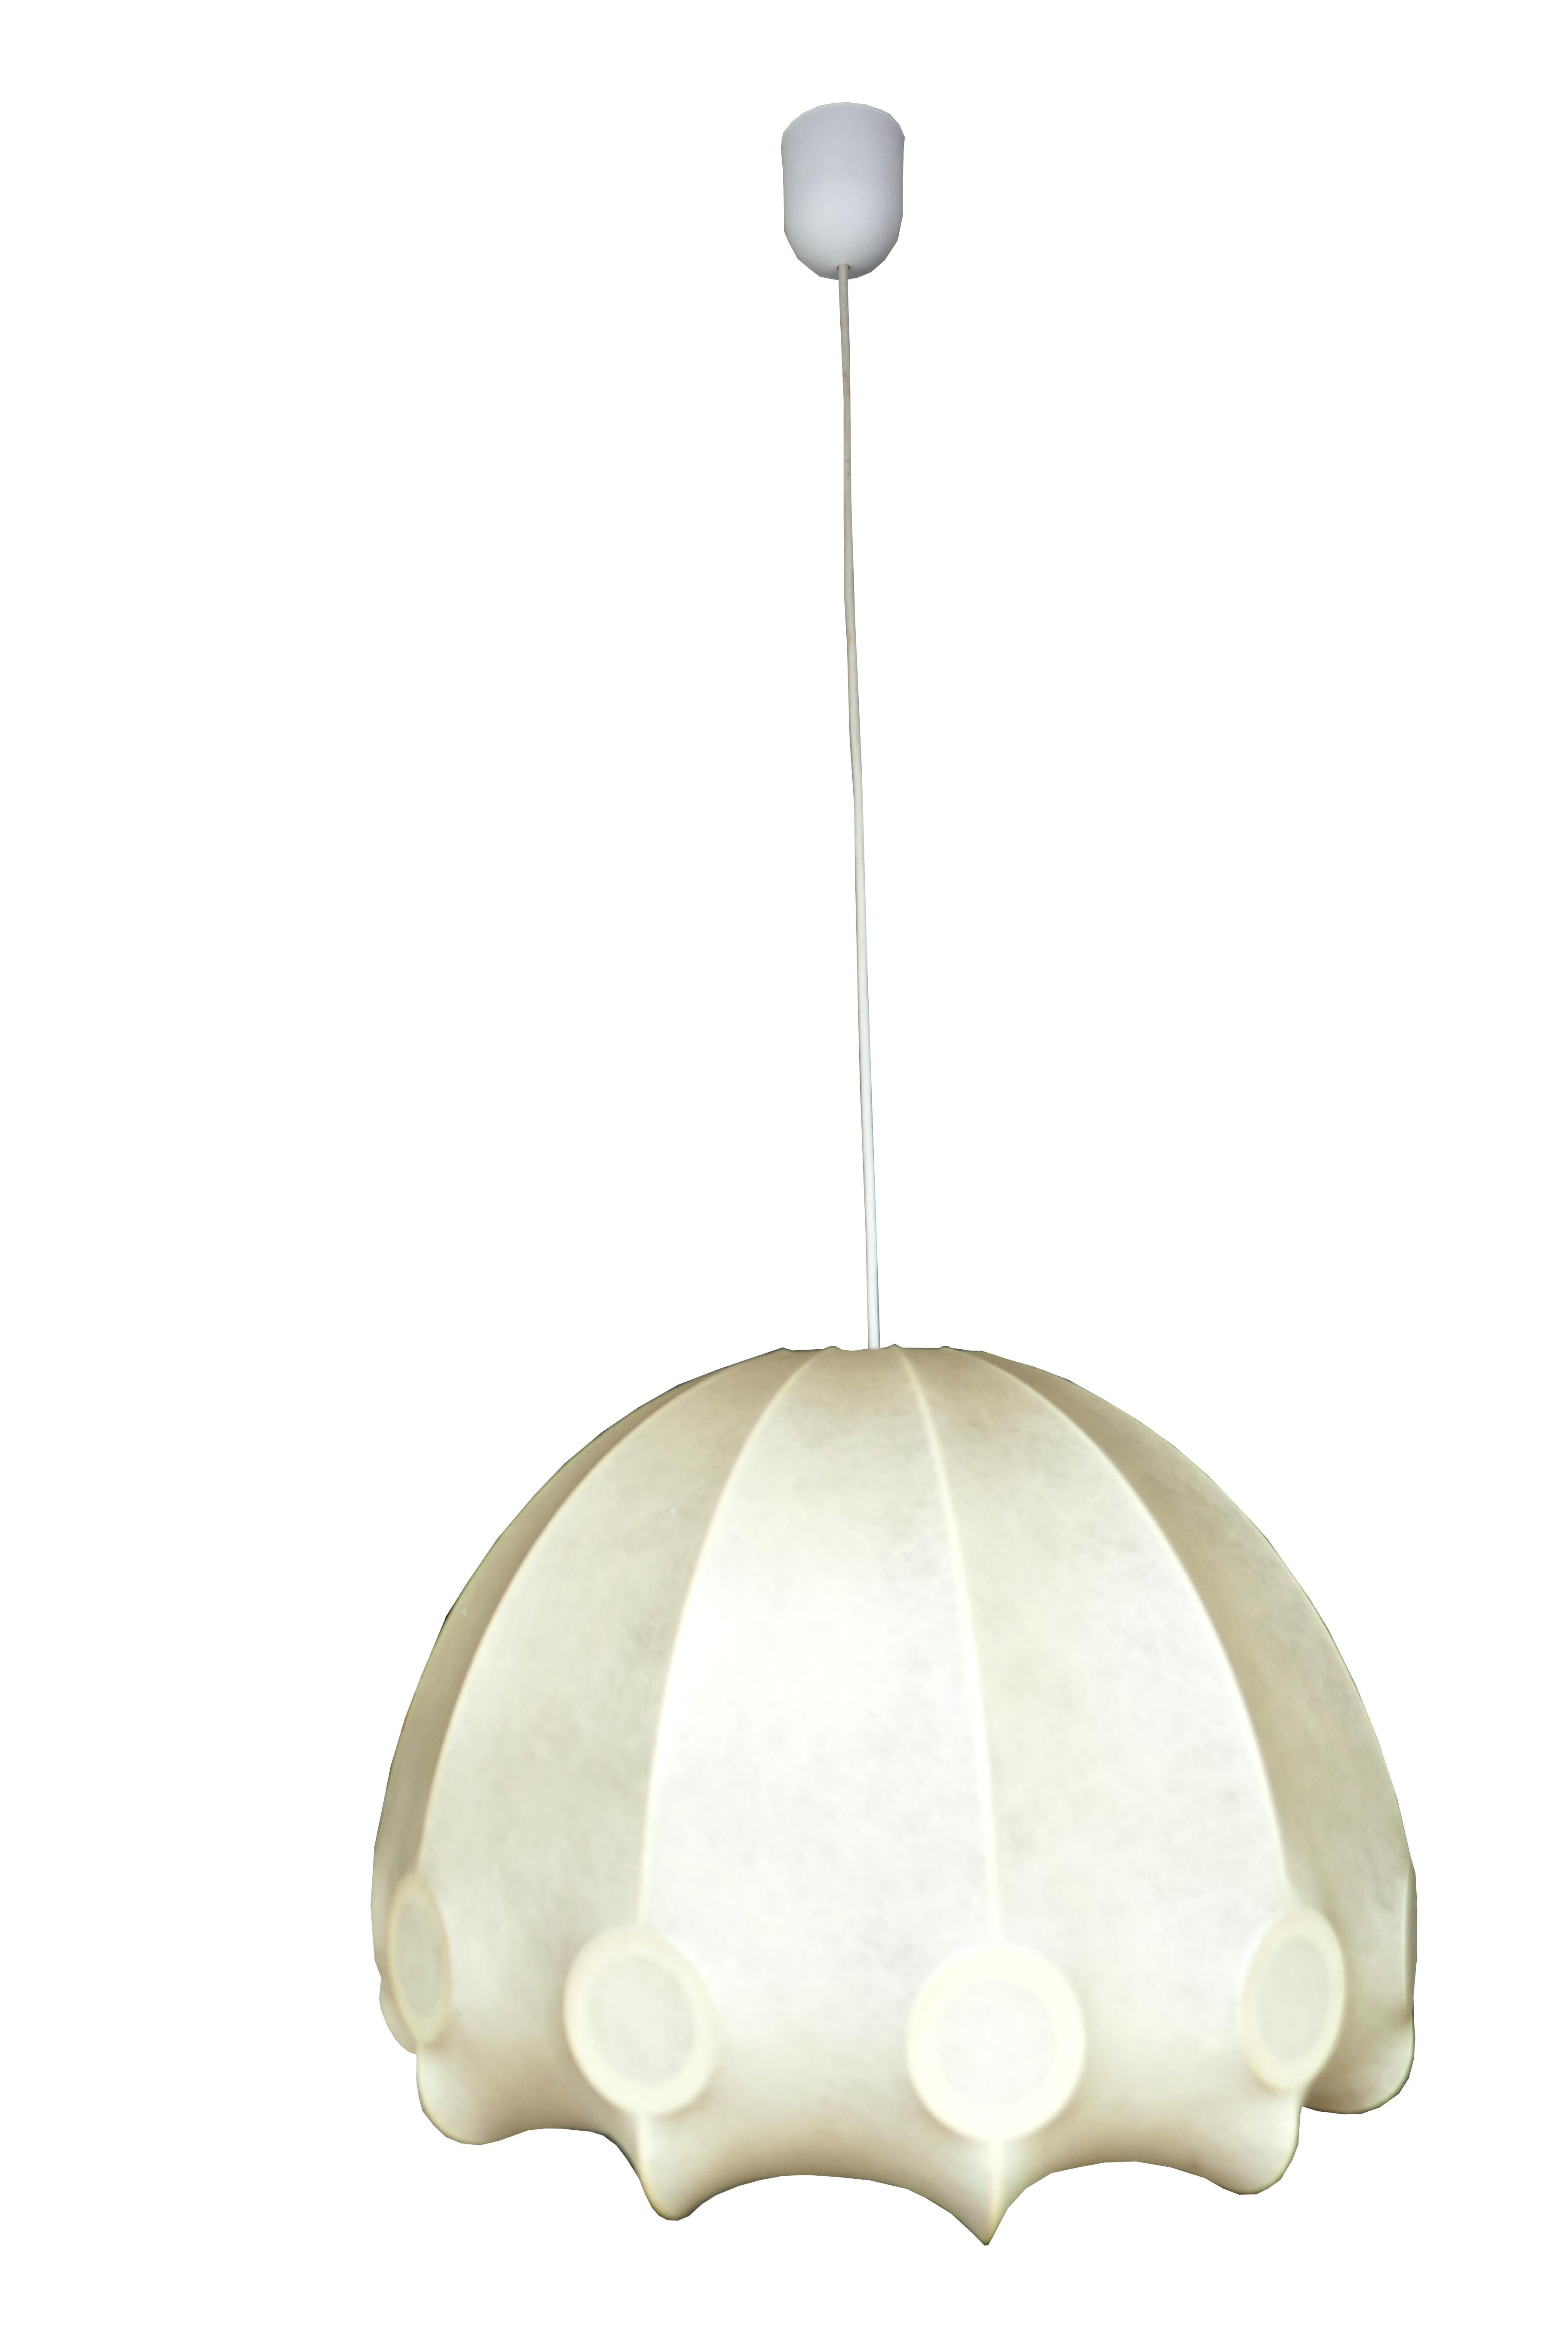 Lamp Friedel Wauer or Flos Castigloni Scarpa Cocoon For Sale 6